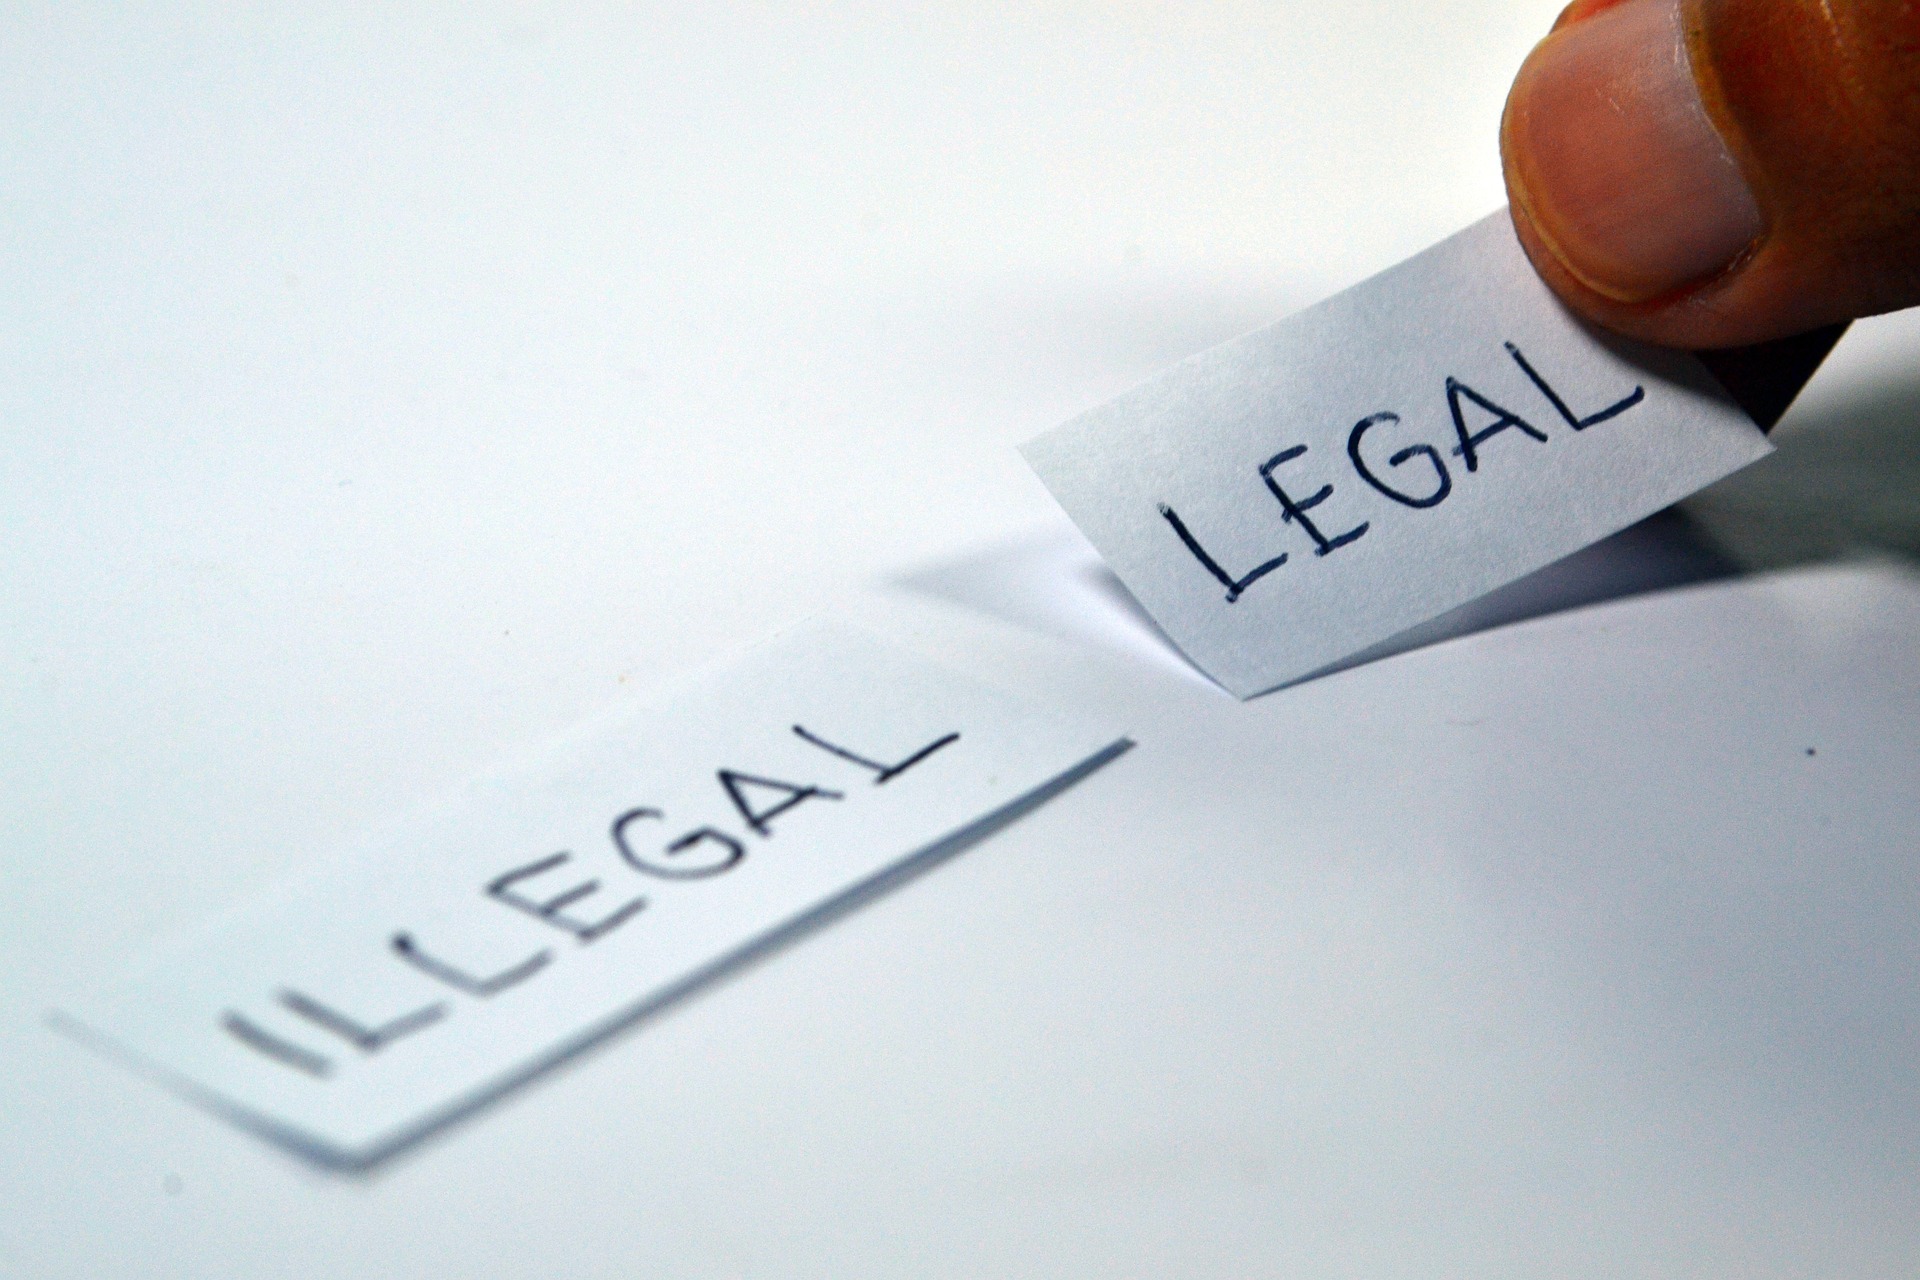 Legal and illegal written on paper